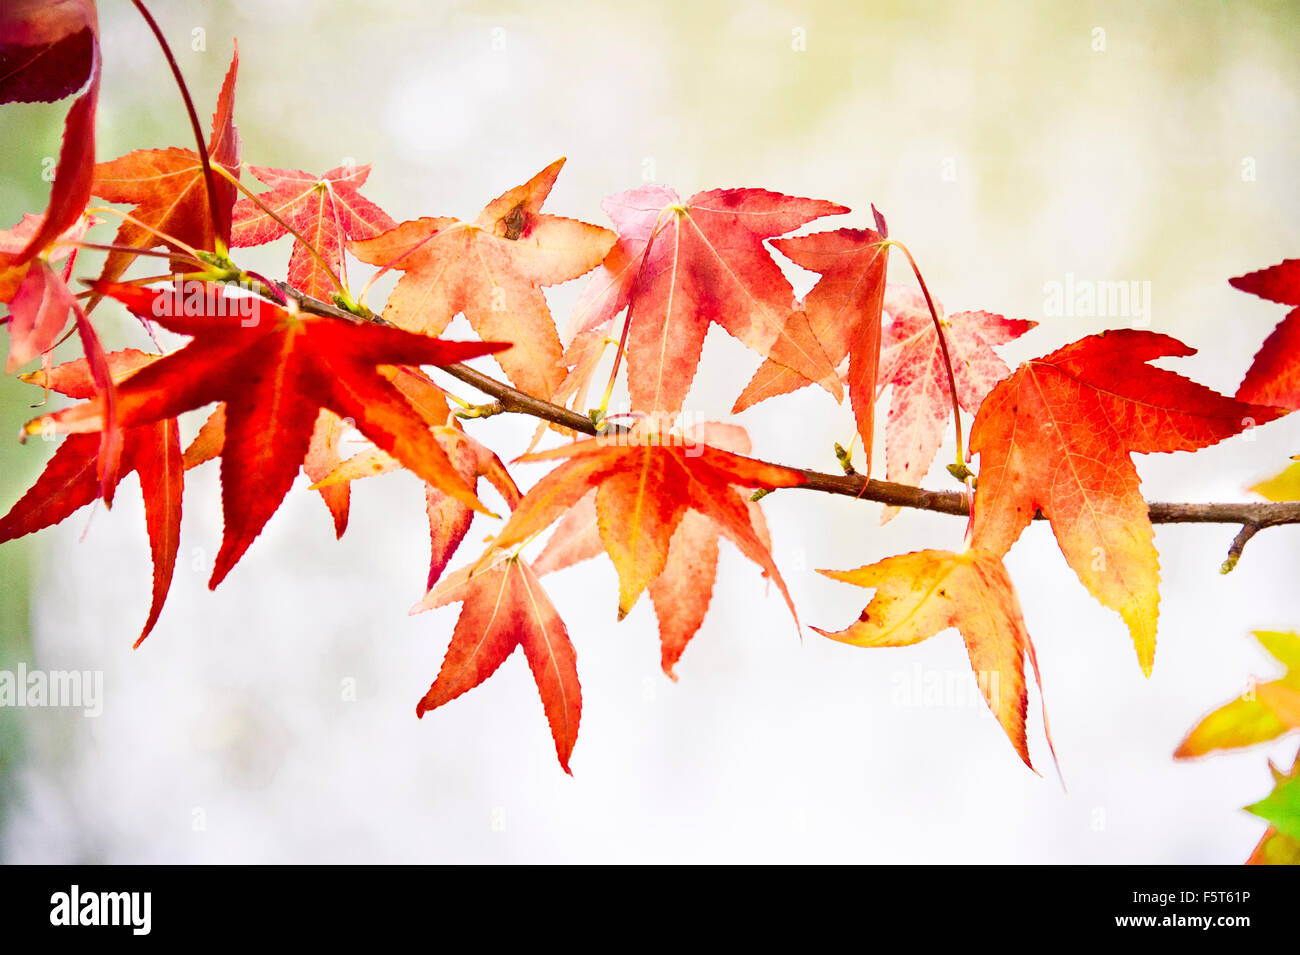 red leaves on branch in fall season Stock Photo